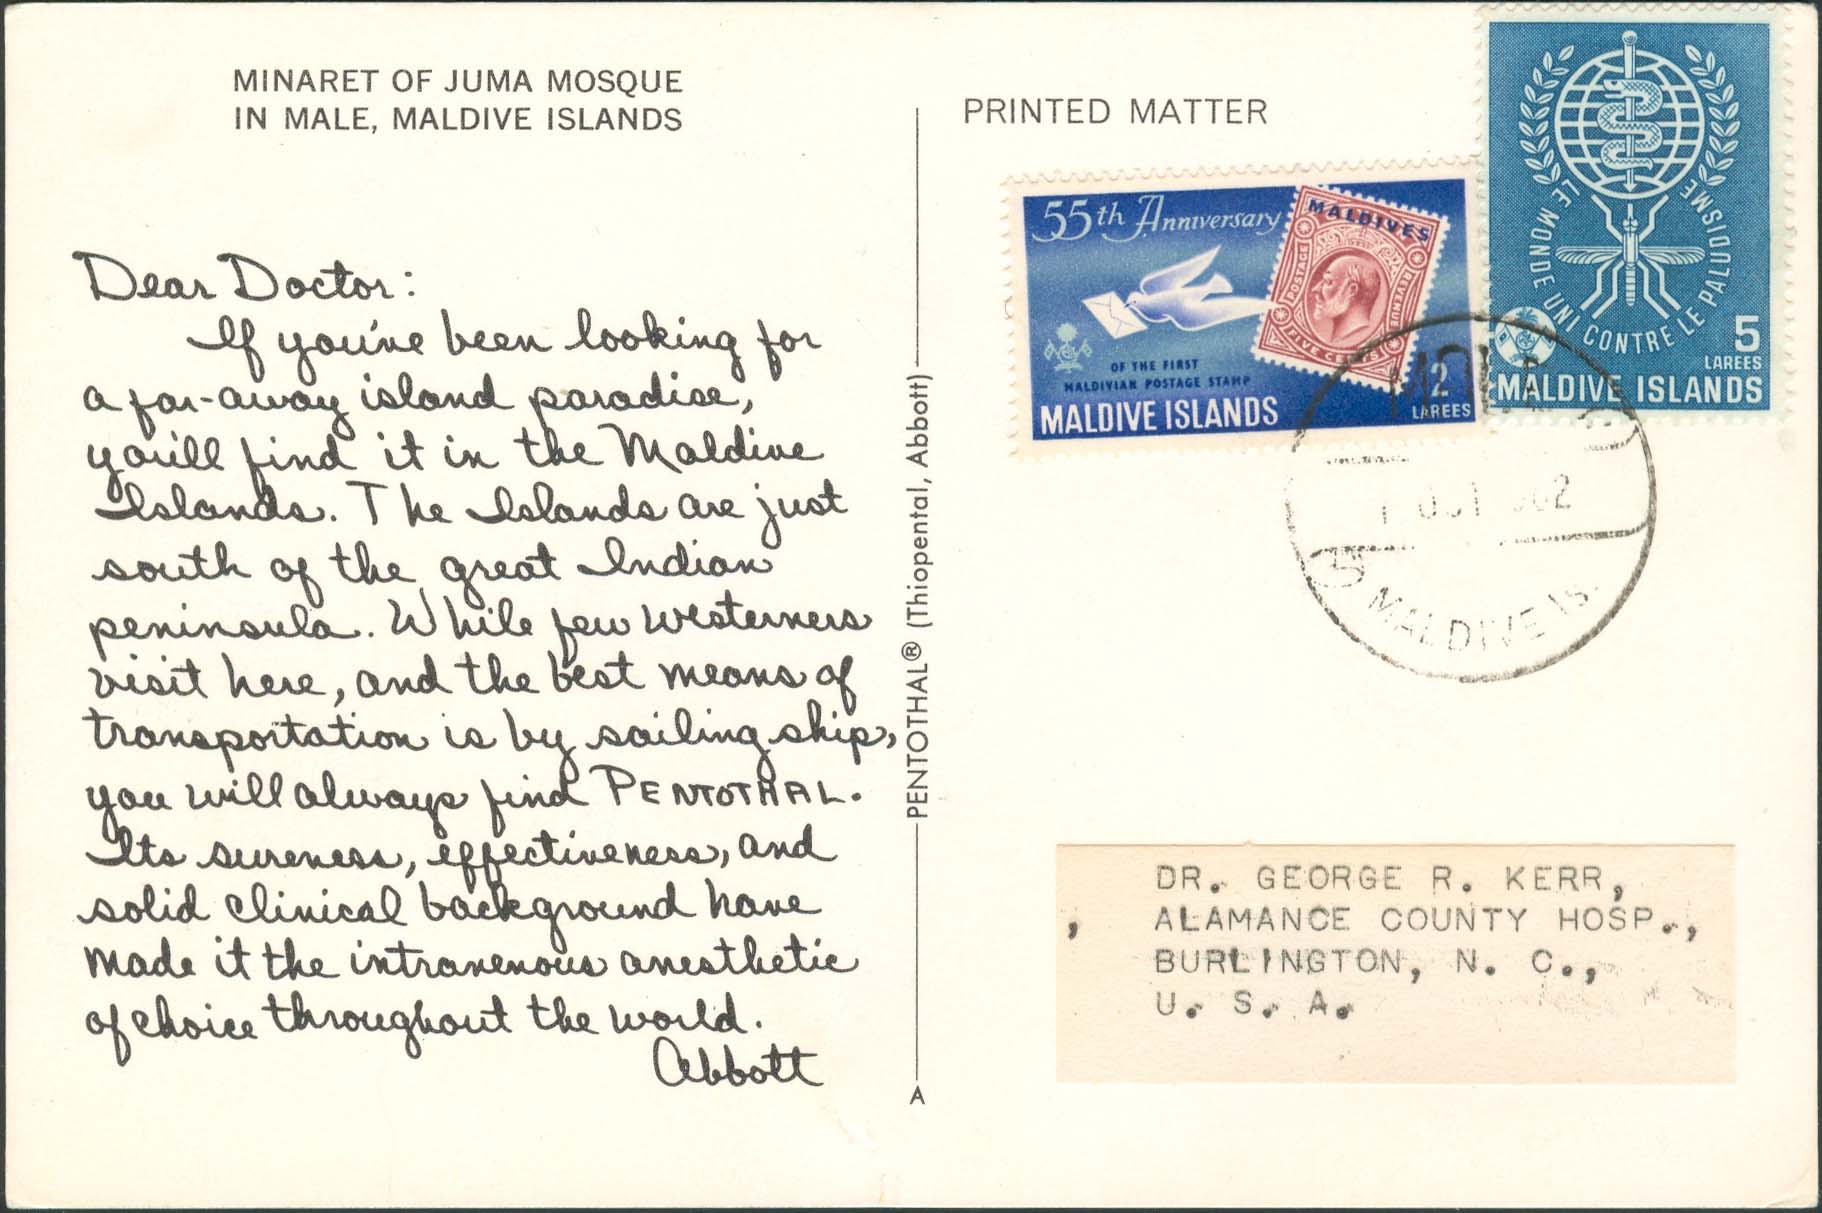 Dear Doctor Postcard - Type A - United States - 1962, Oct 1